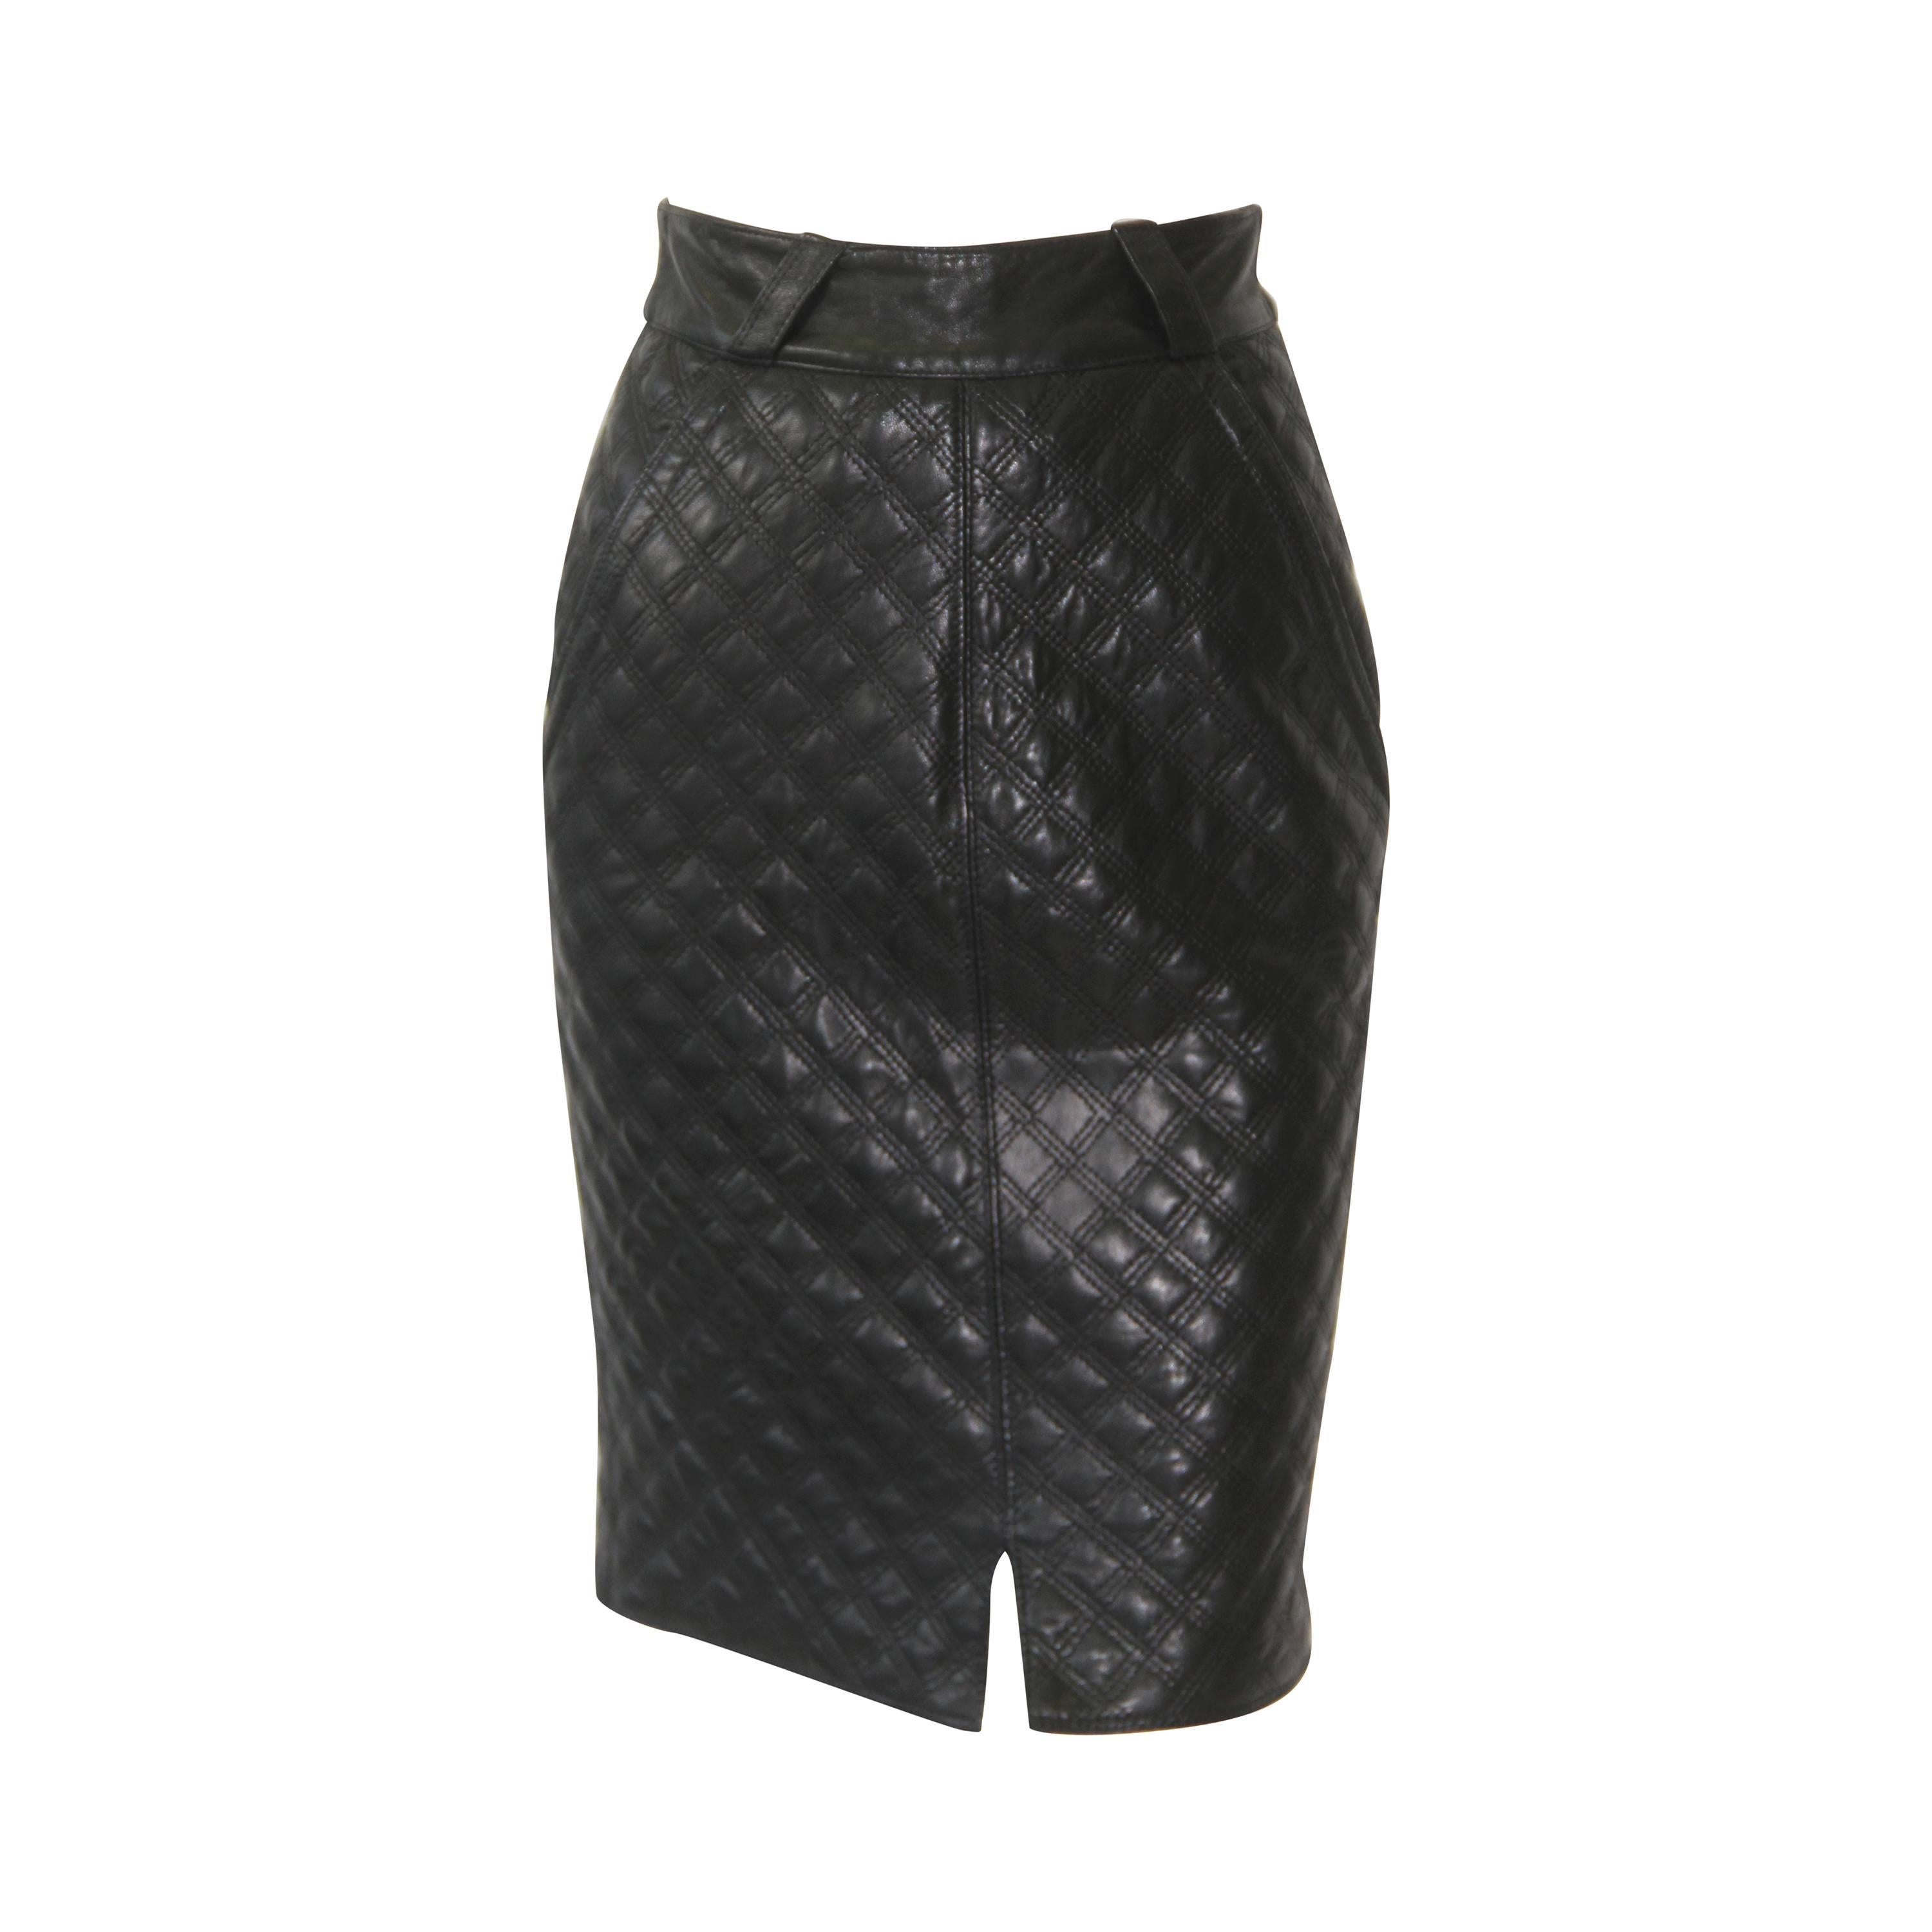 Rare Gianni Versace Quilted Leather Skirt 1983 For Sale